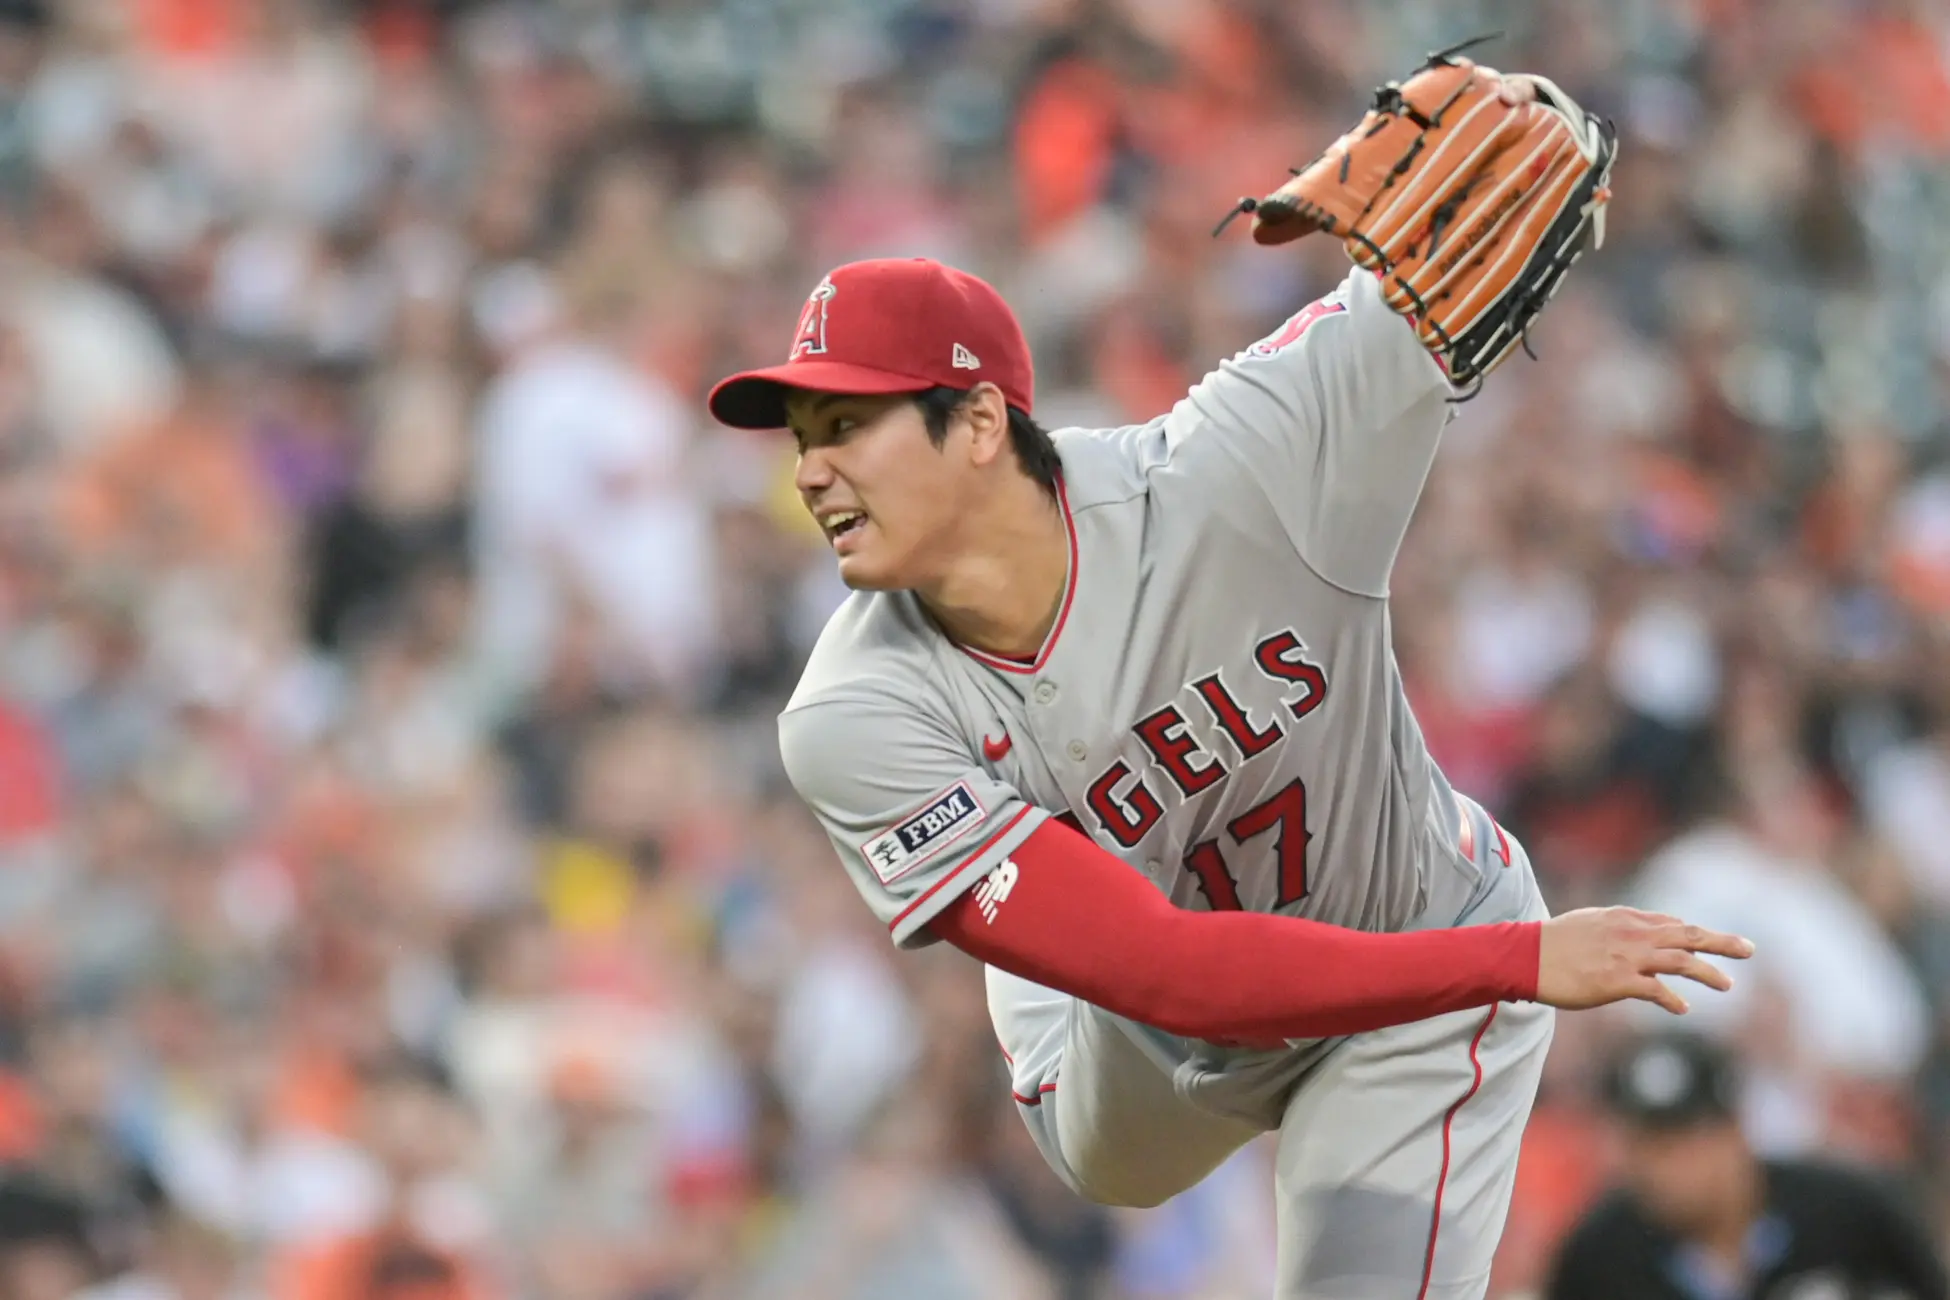 Ohtani pitches 7 innings, reaches base 5 times as Angels beat Orioles 9-5